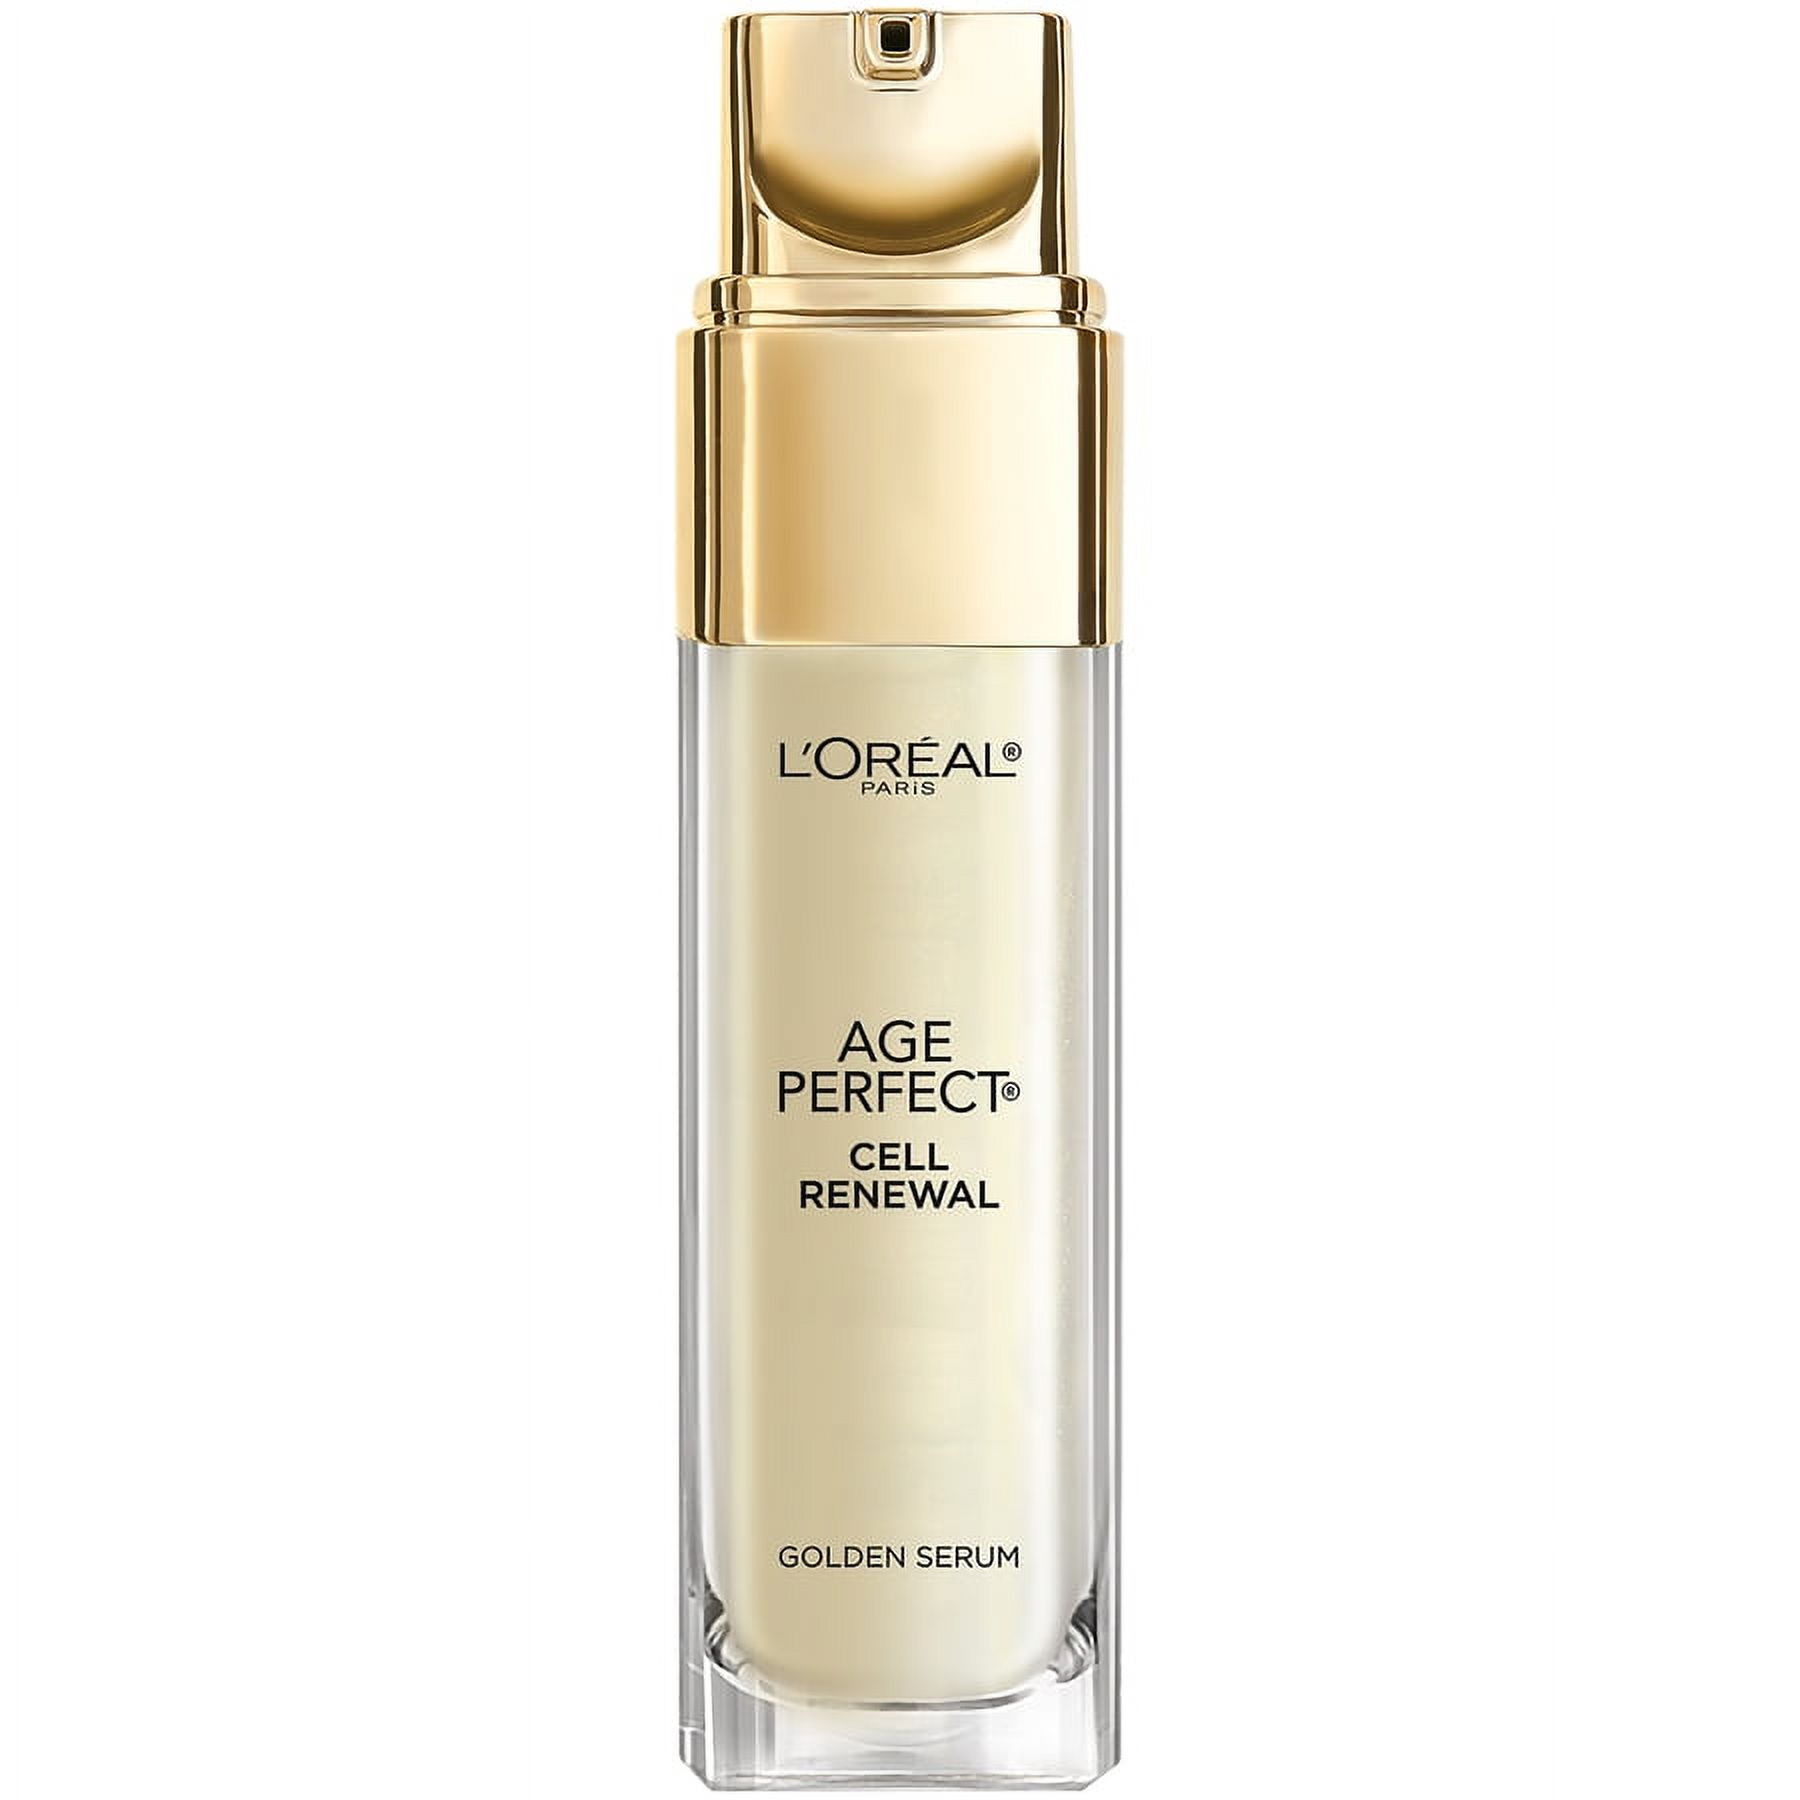 L'Oreal Paris Age Perfect Cell Renewal* Golden Face Serum, Anti-Aging, 1 fl. oz. - image 1 of 3